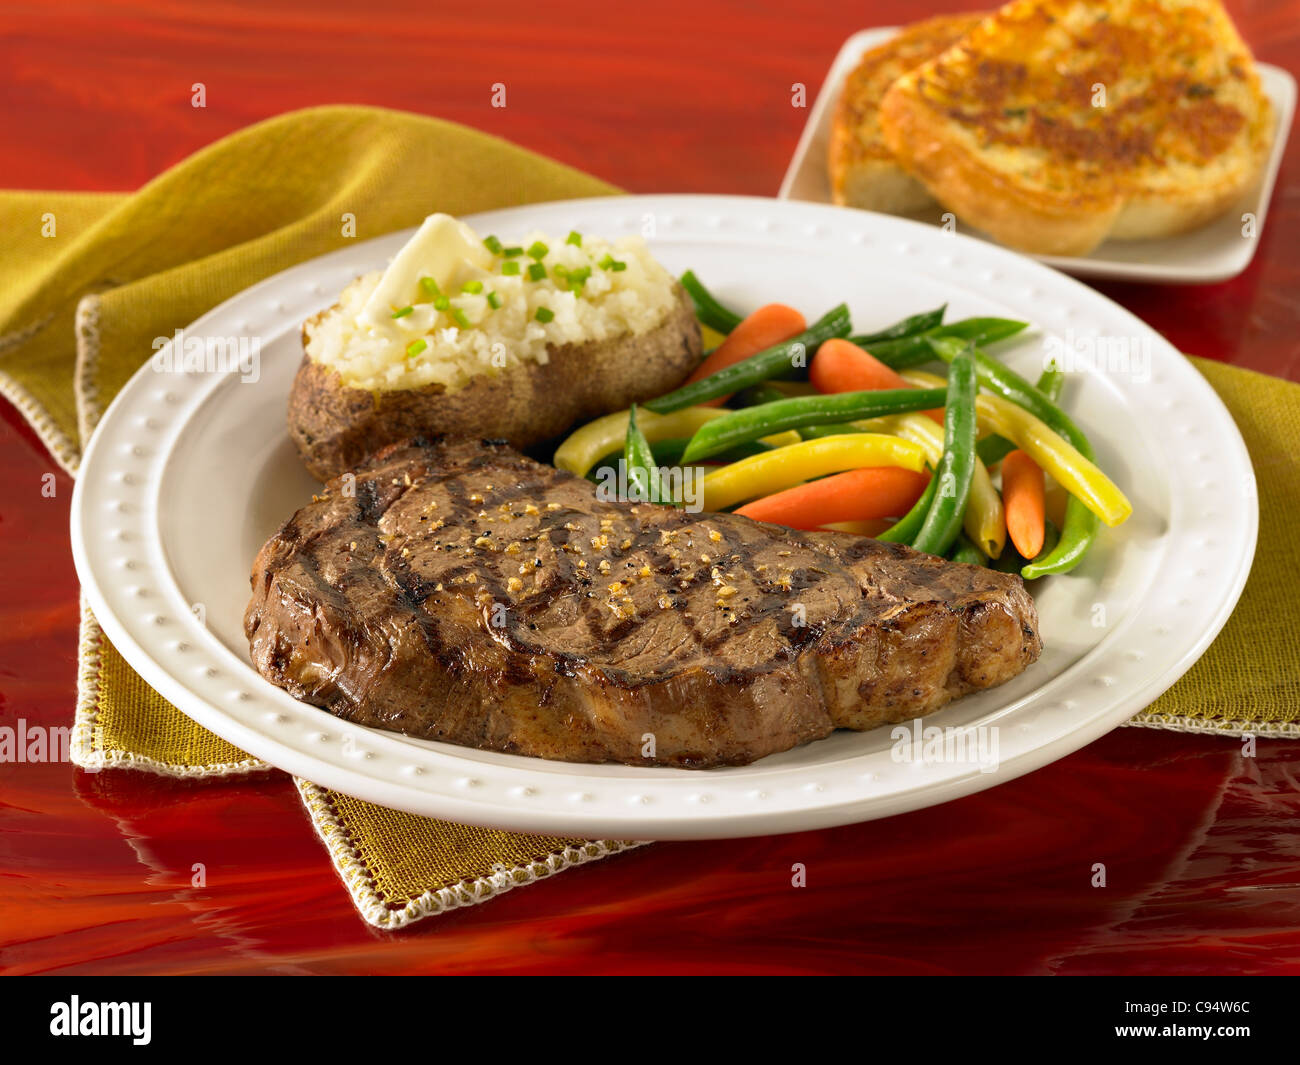 Rib eye steak served with a loaded baked potato, vegetables and garlic bread Stock Photo